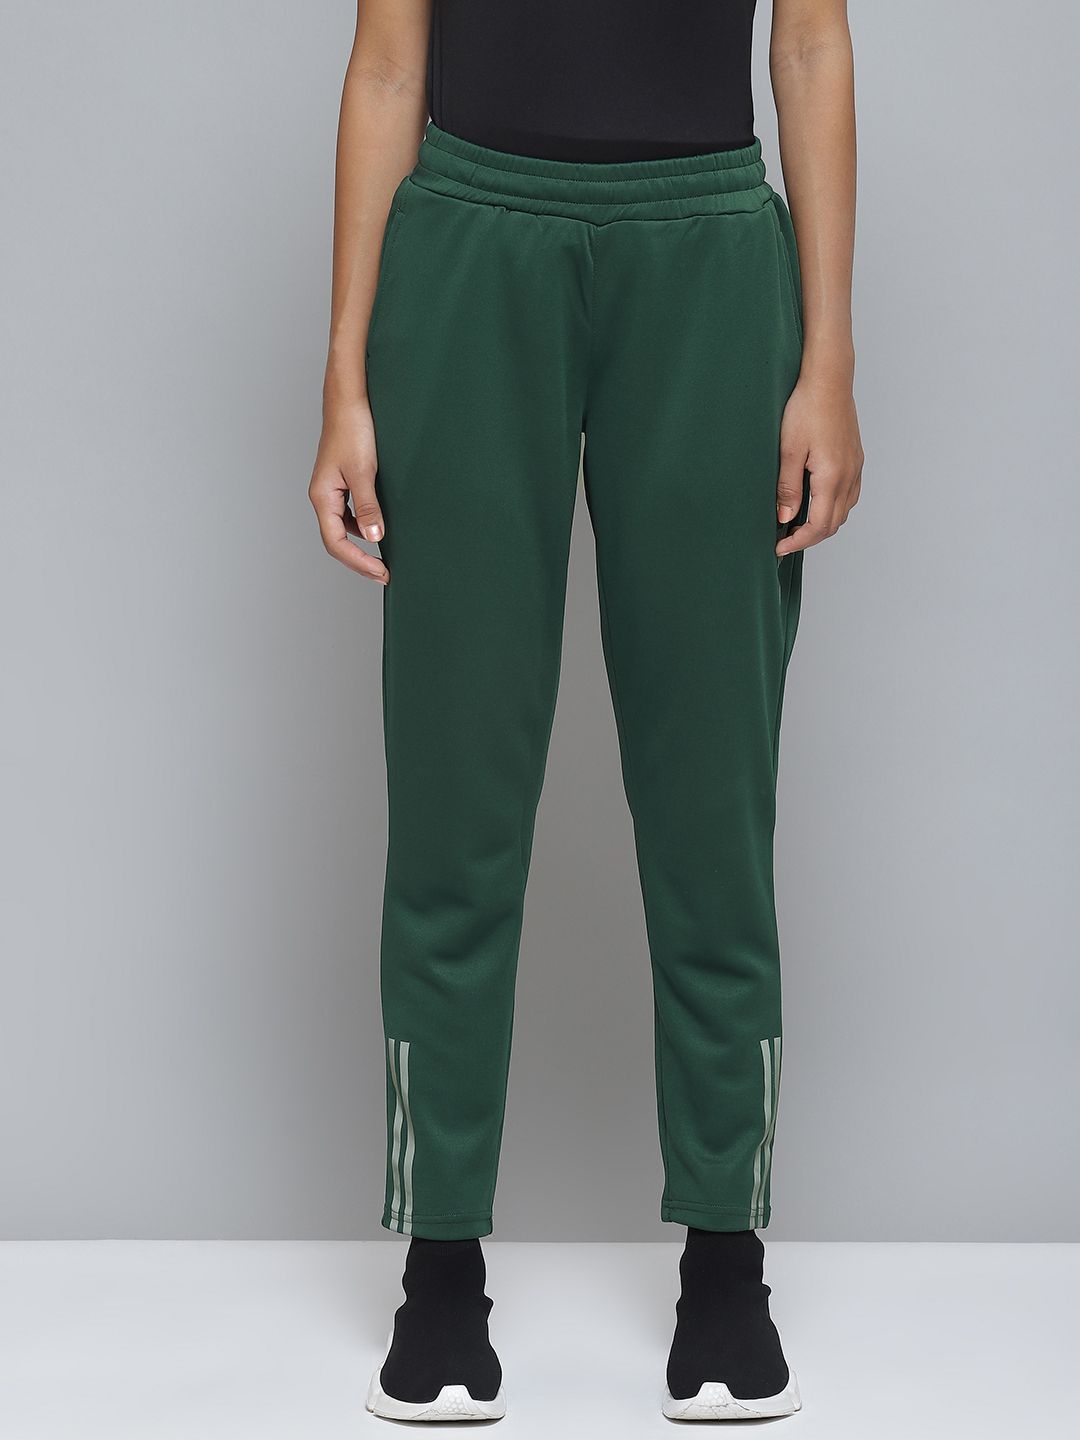 Alcis Women Teal Green Solid Track Pants Price in India